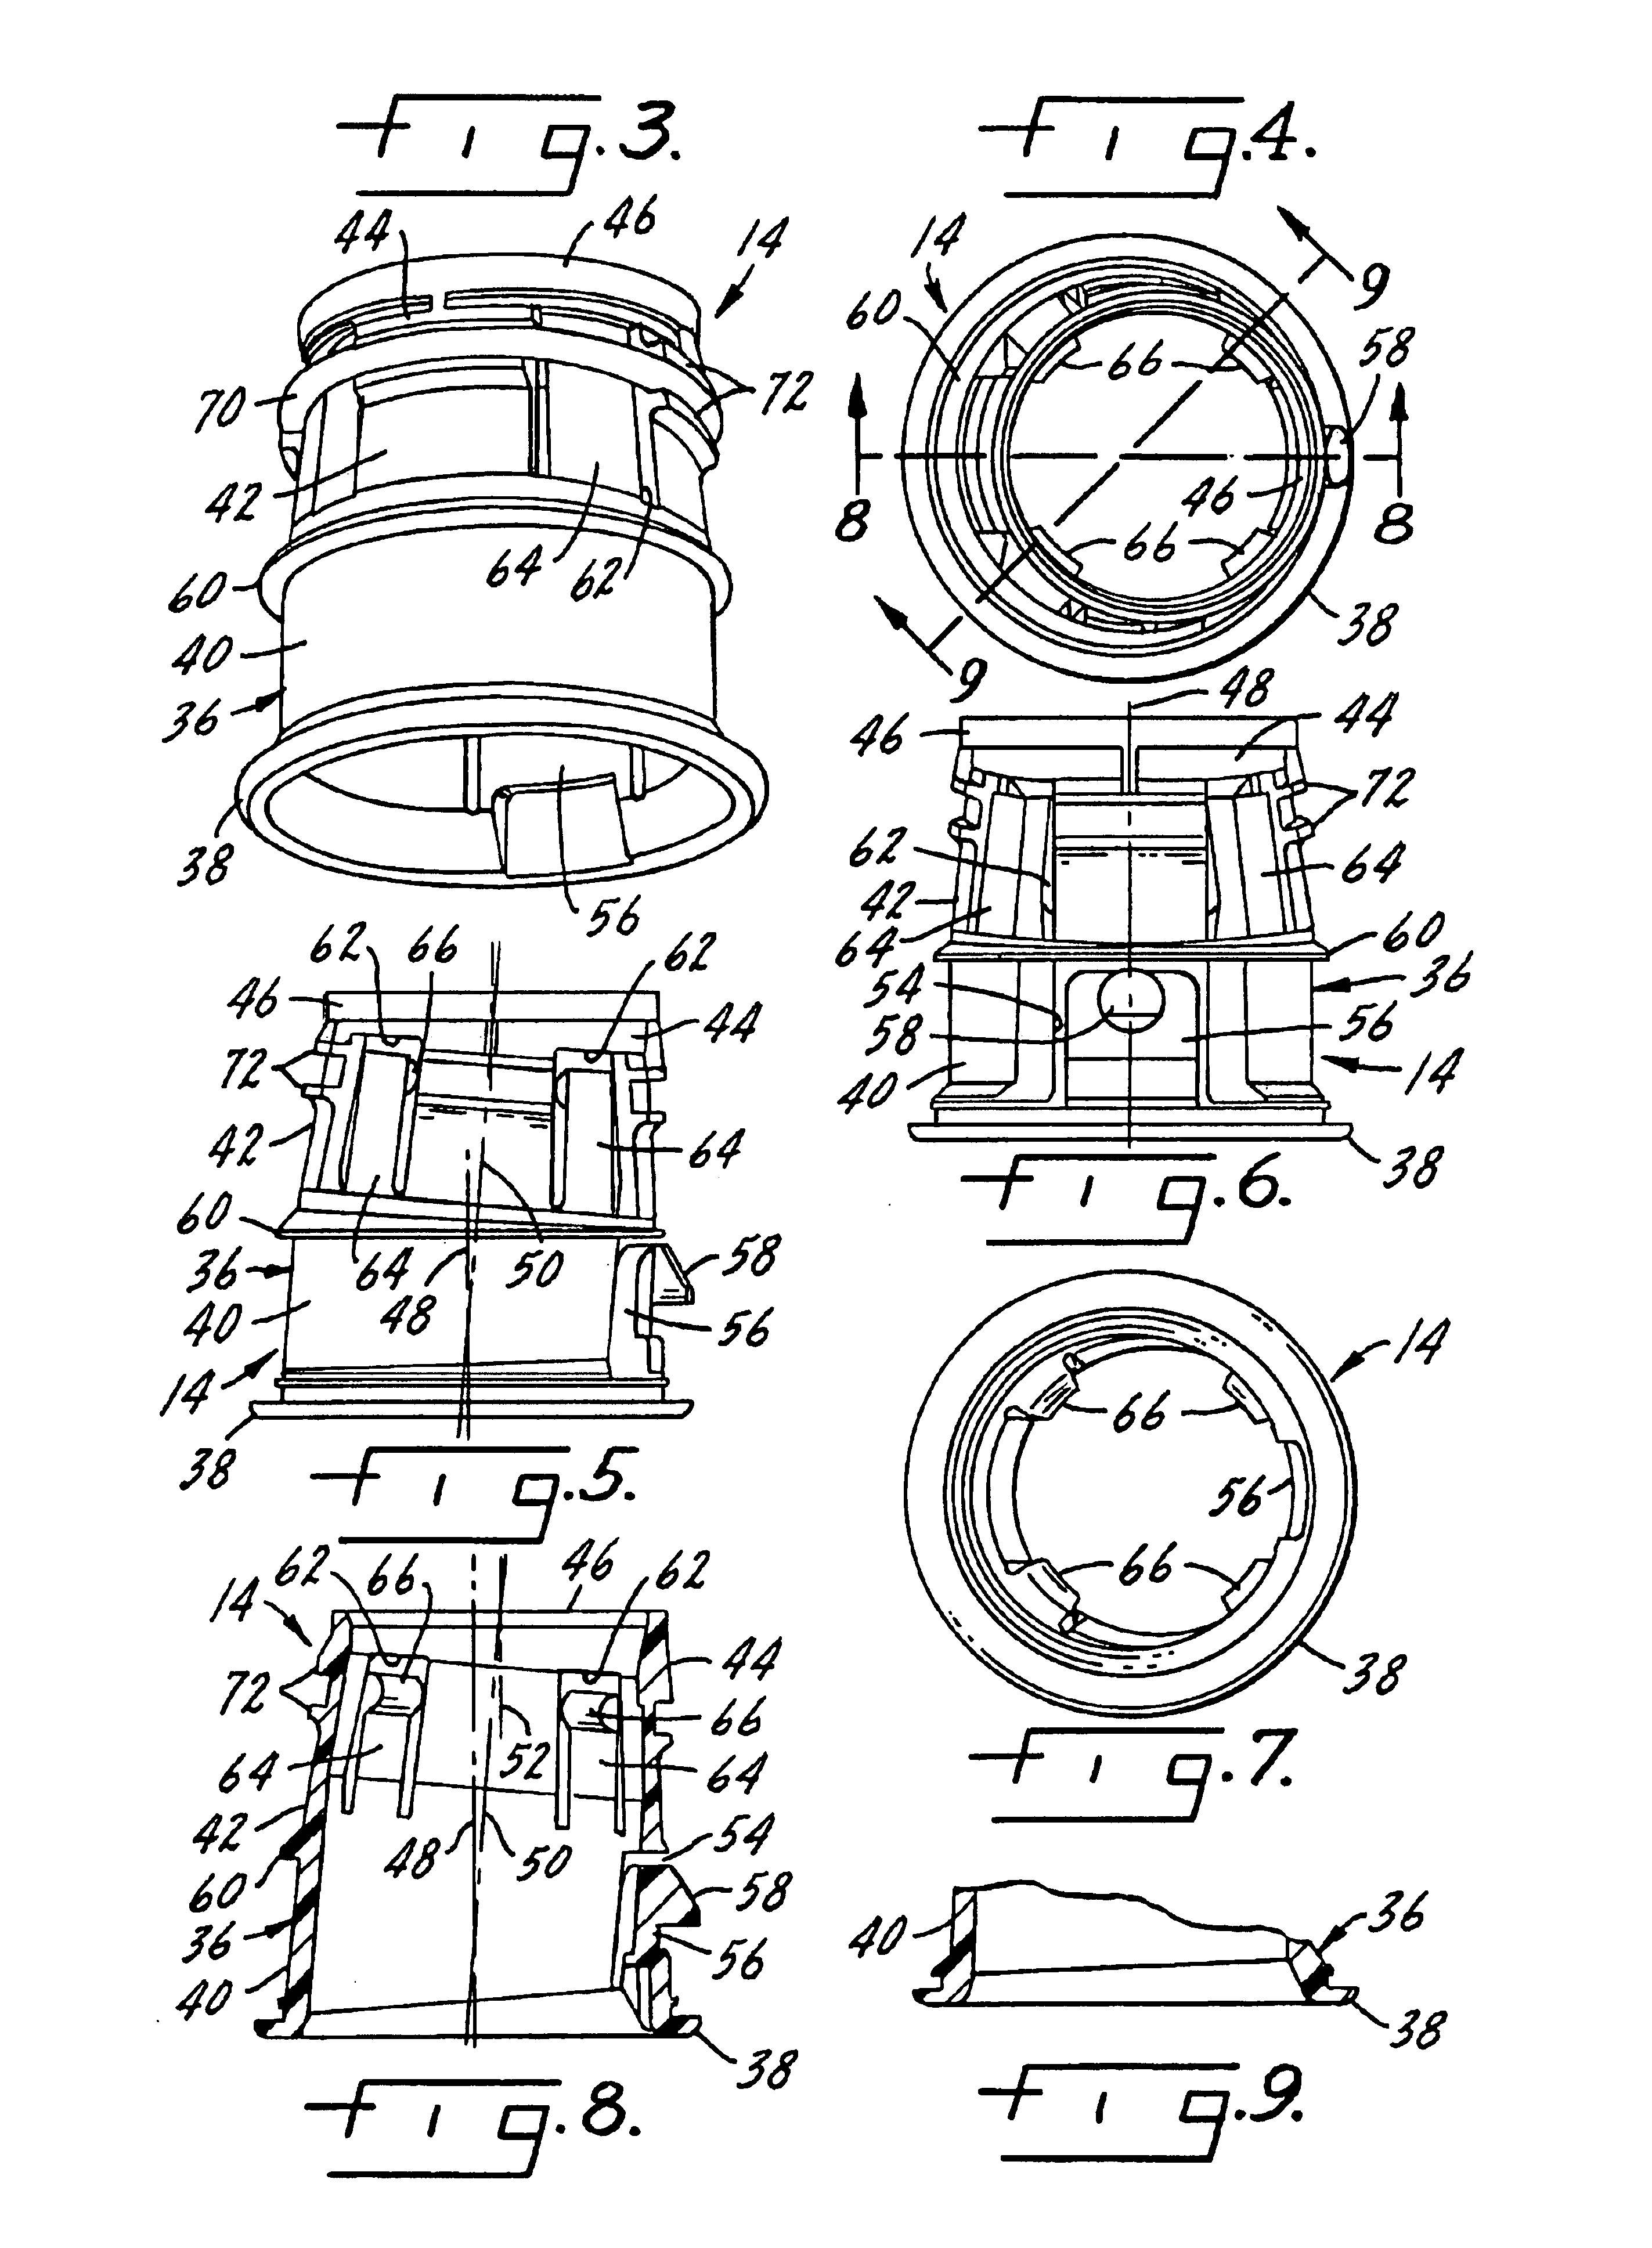 Pullout spray head docking collar with enhanced retaining force